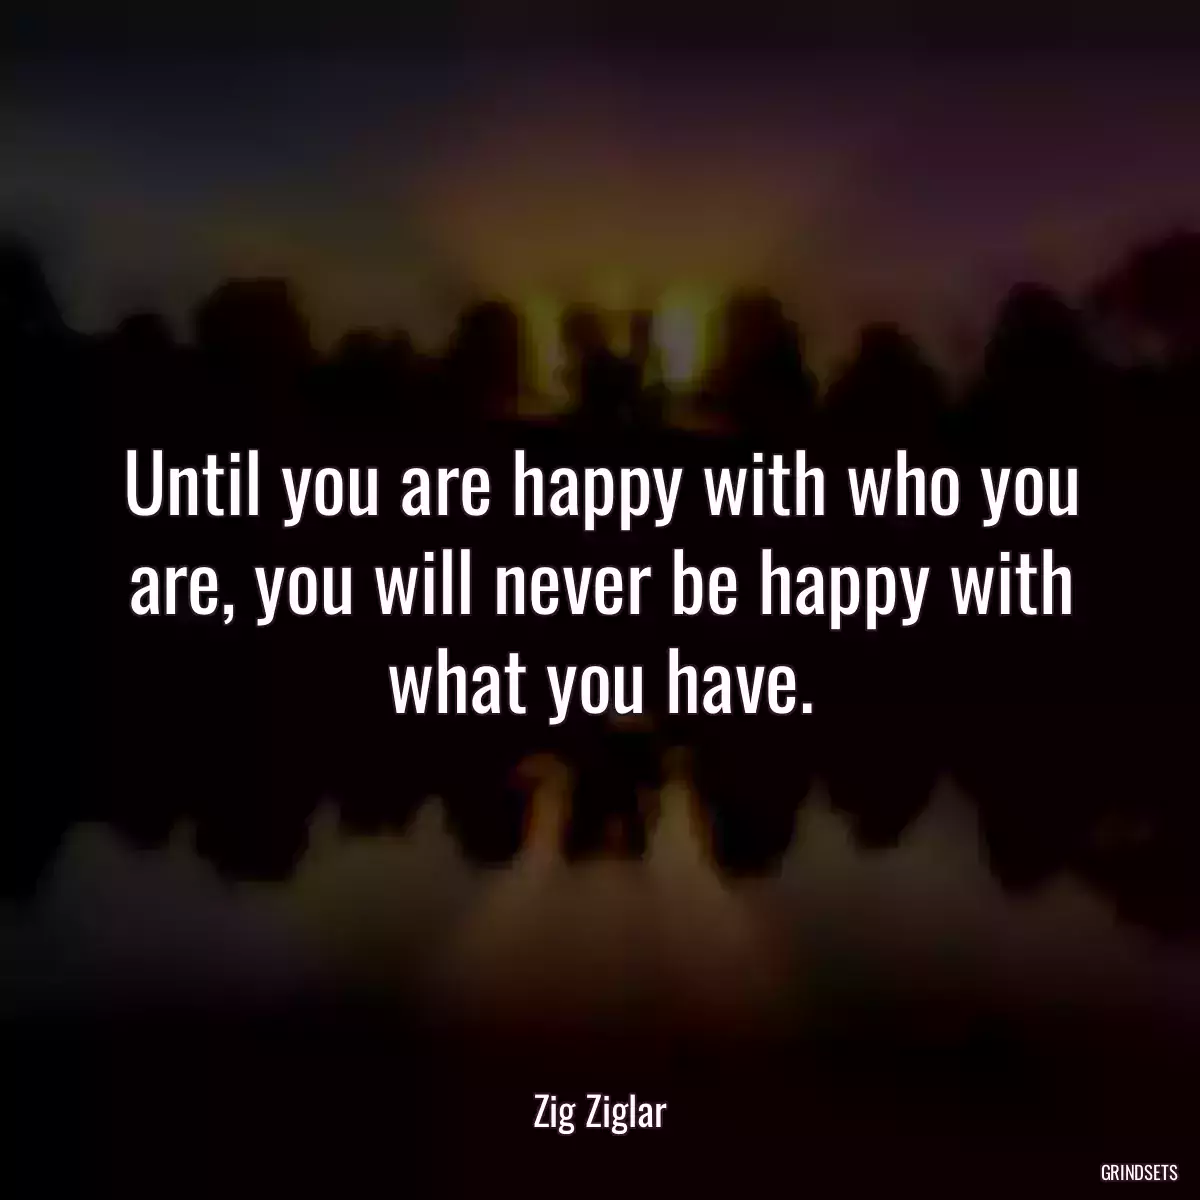 Until you are happy with who you are, you will never be happy with what you have.